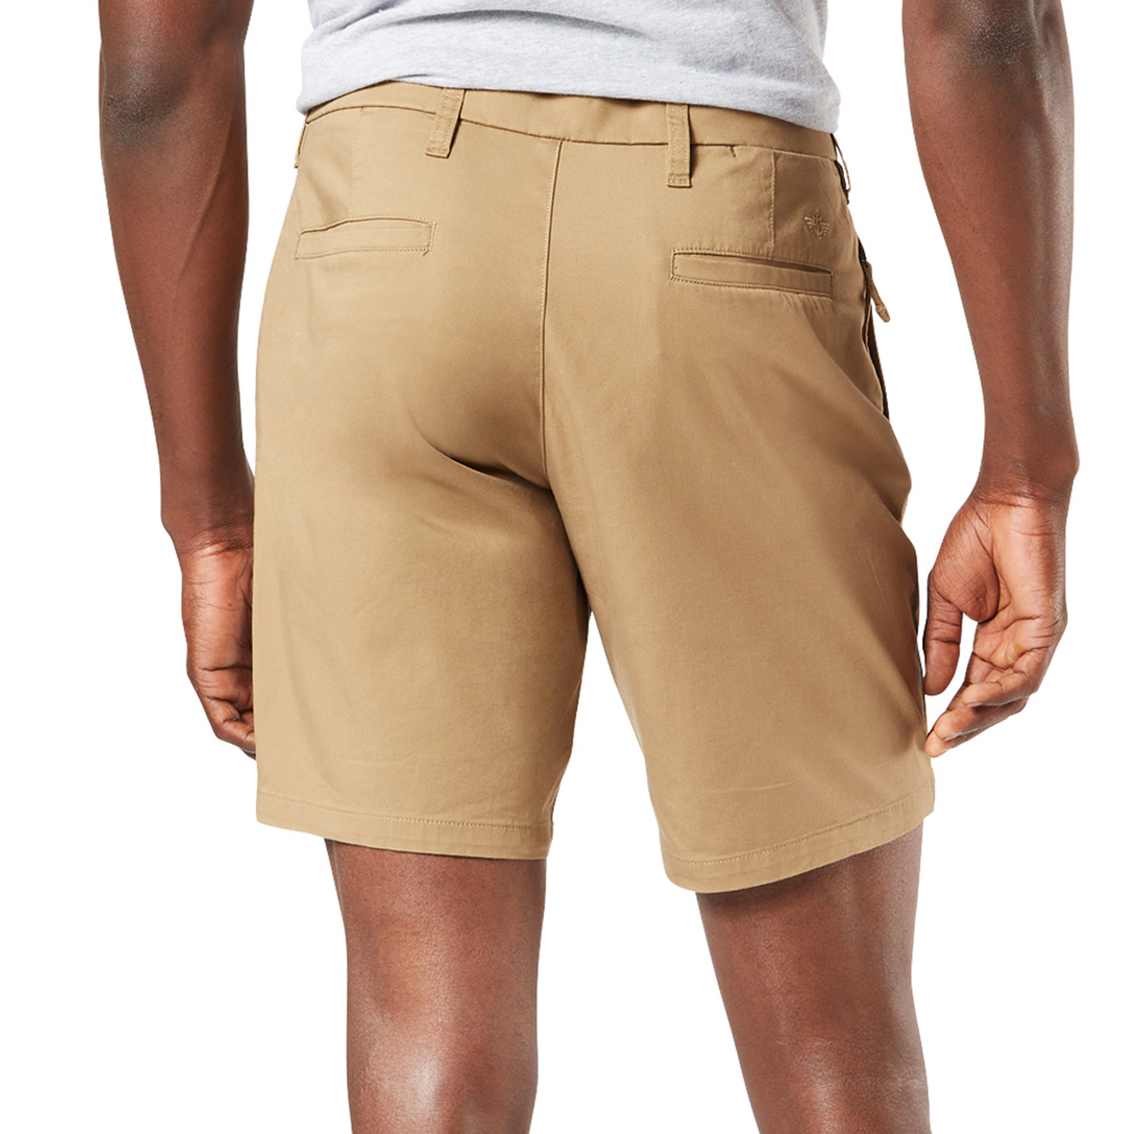 Dockers Supreme Flex Ultimate 9 in. Shorts - Image 2 of 3